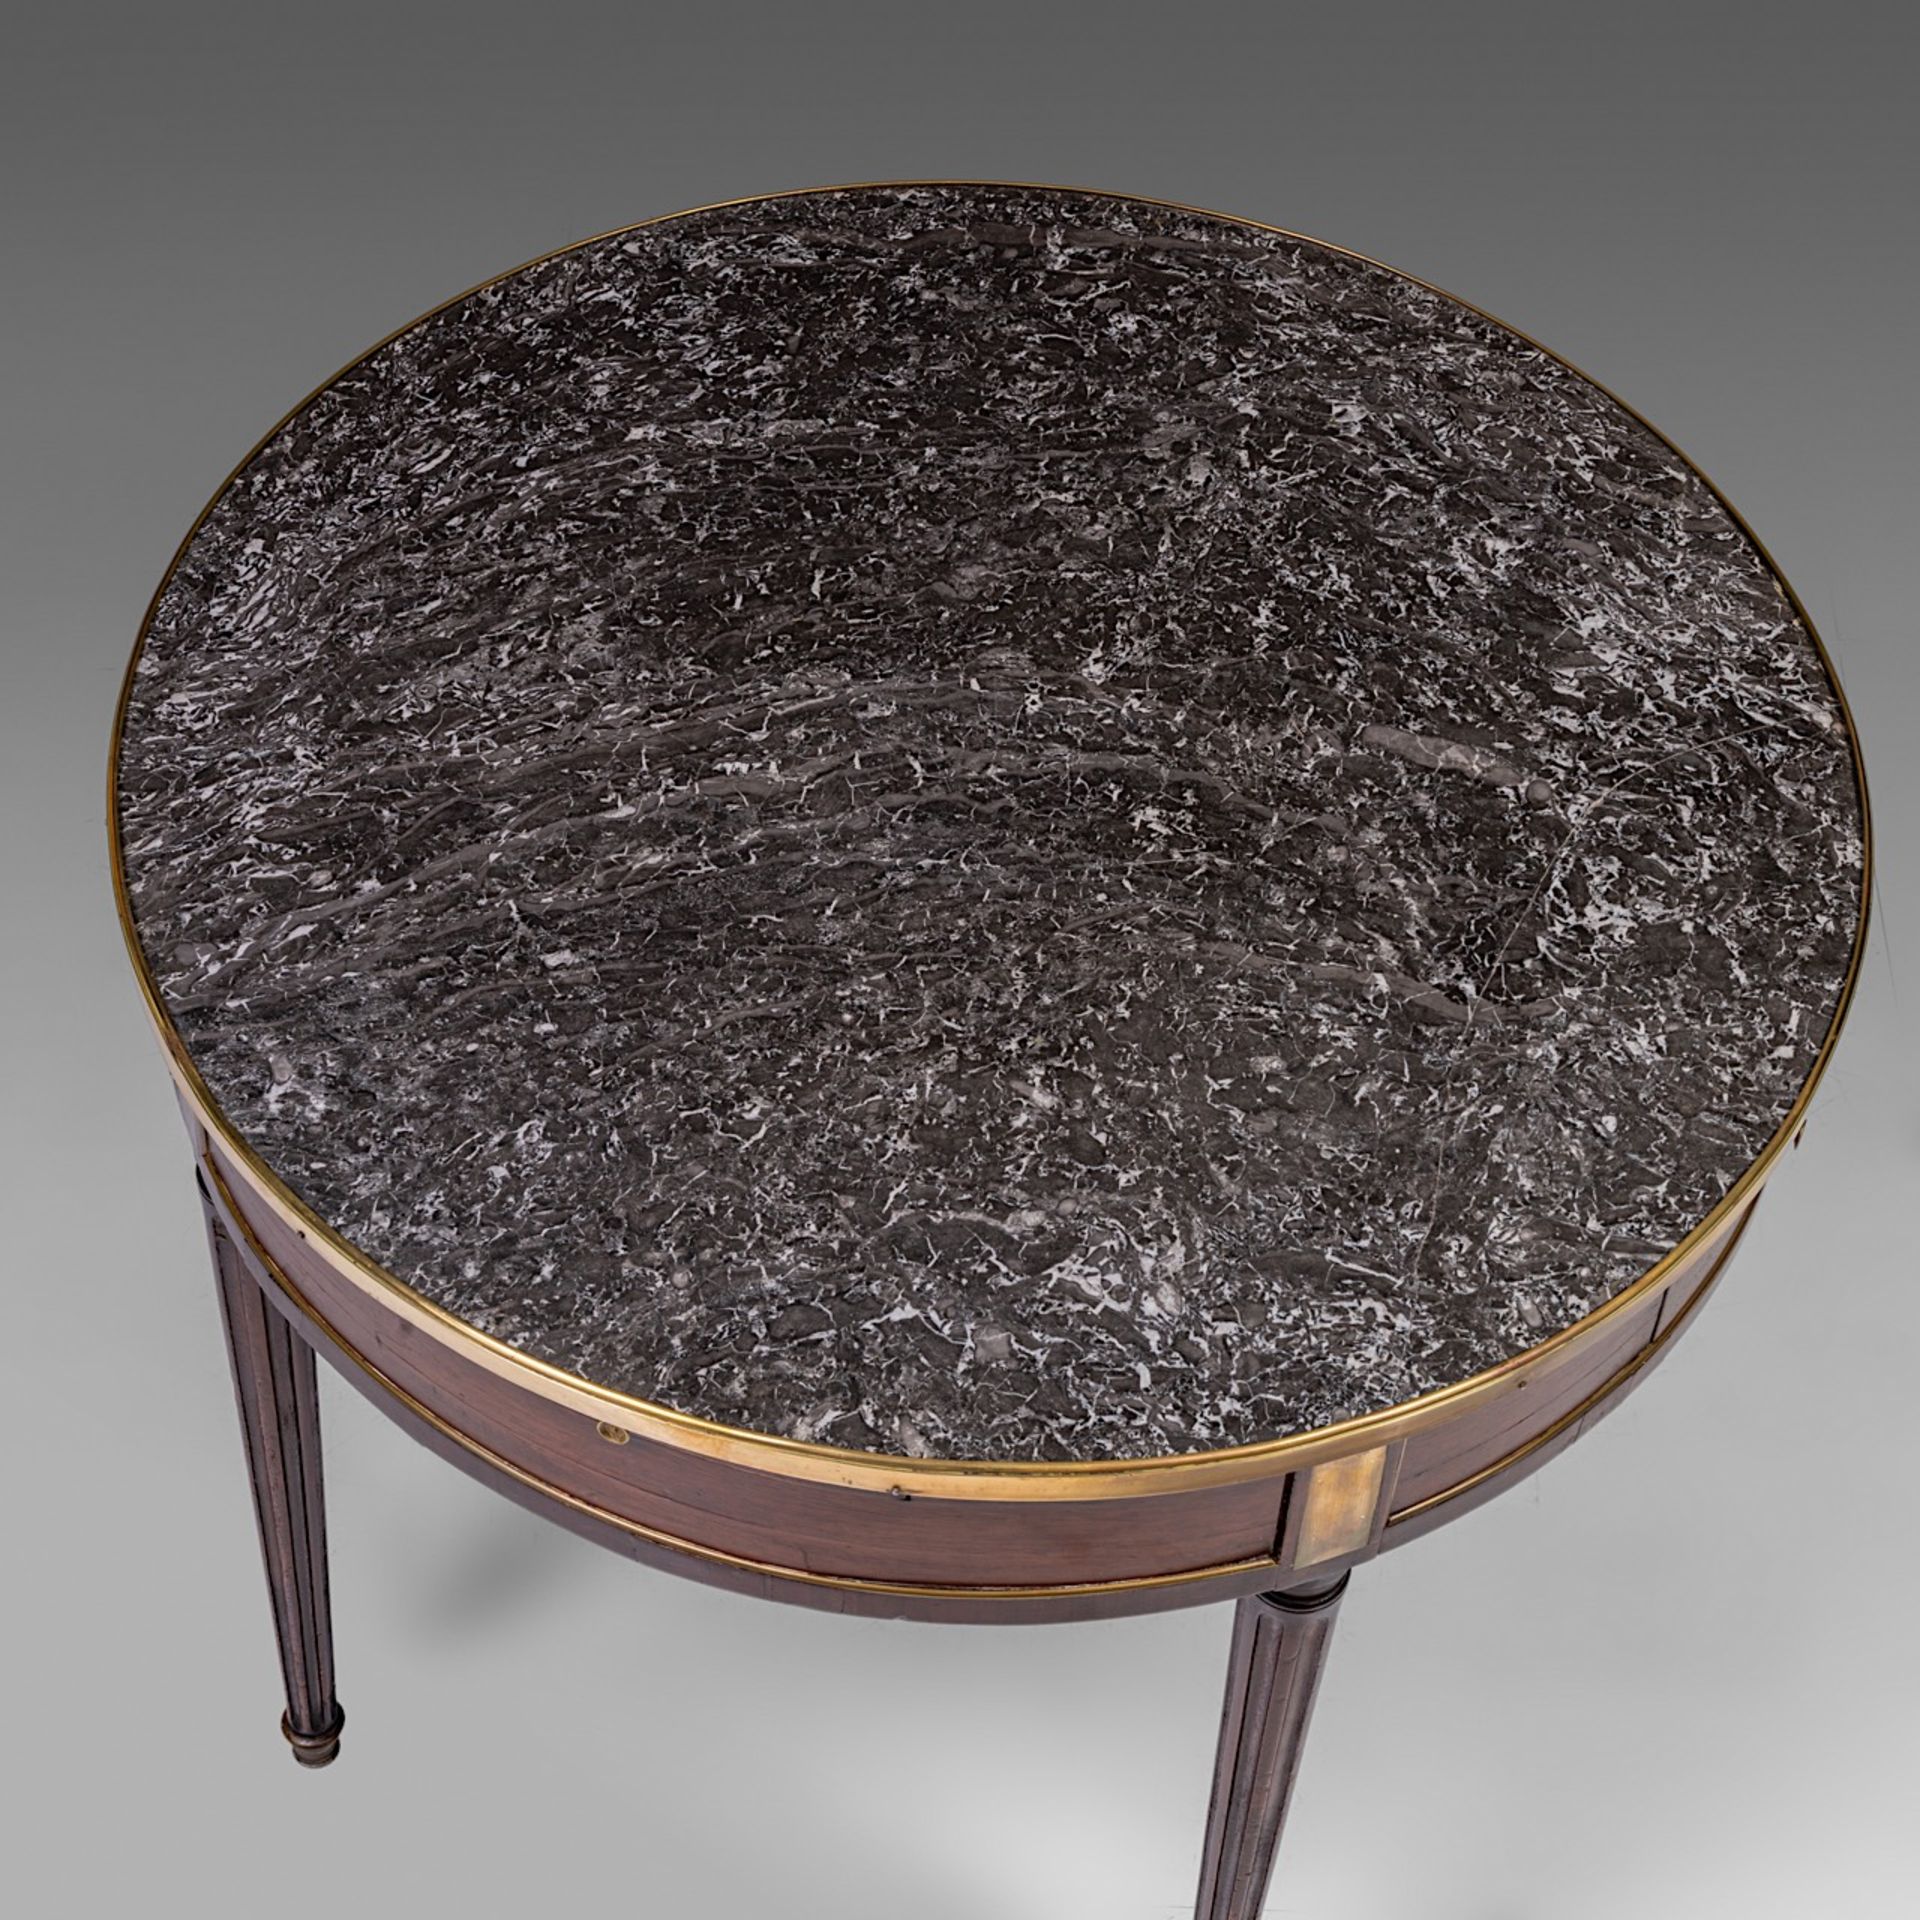 A Louis XVI bouillotte table with a marble top and gilded bronze mounts, H 73 - dia 85 cm - Image 6 of 8